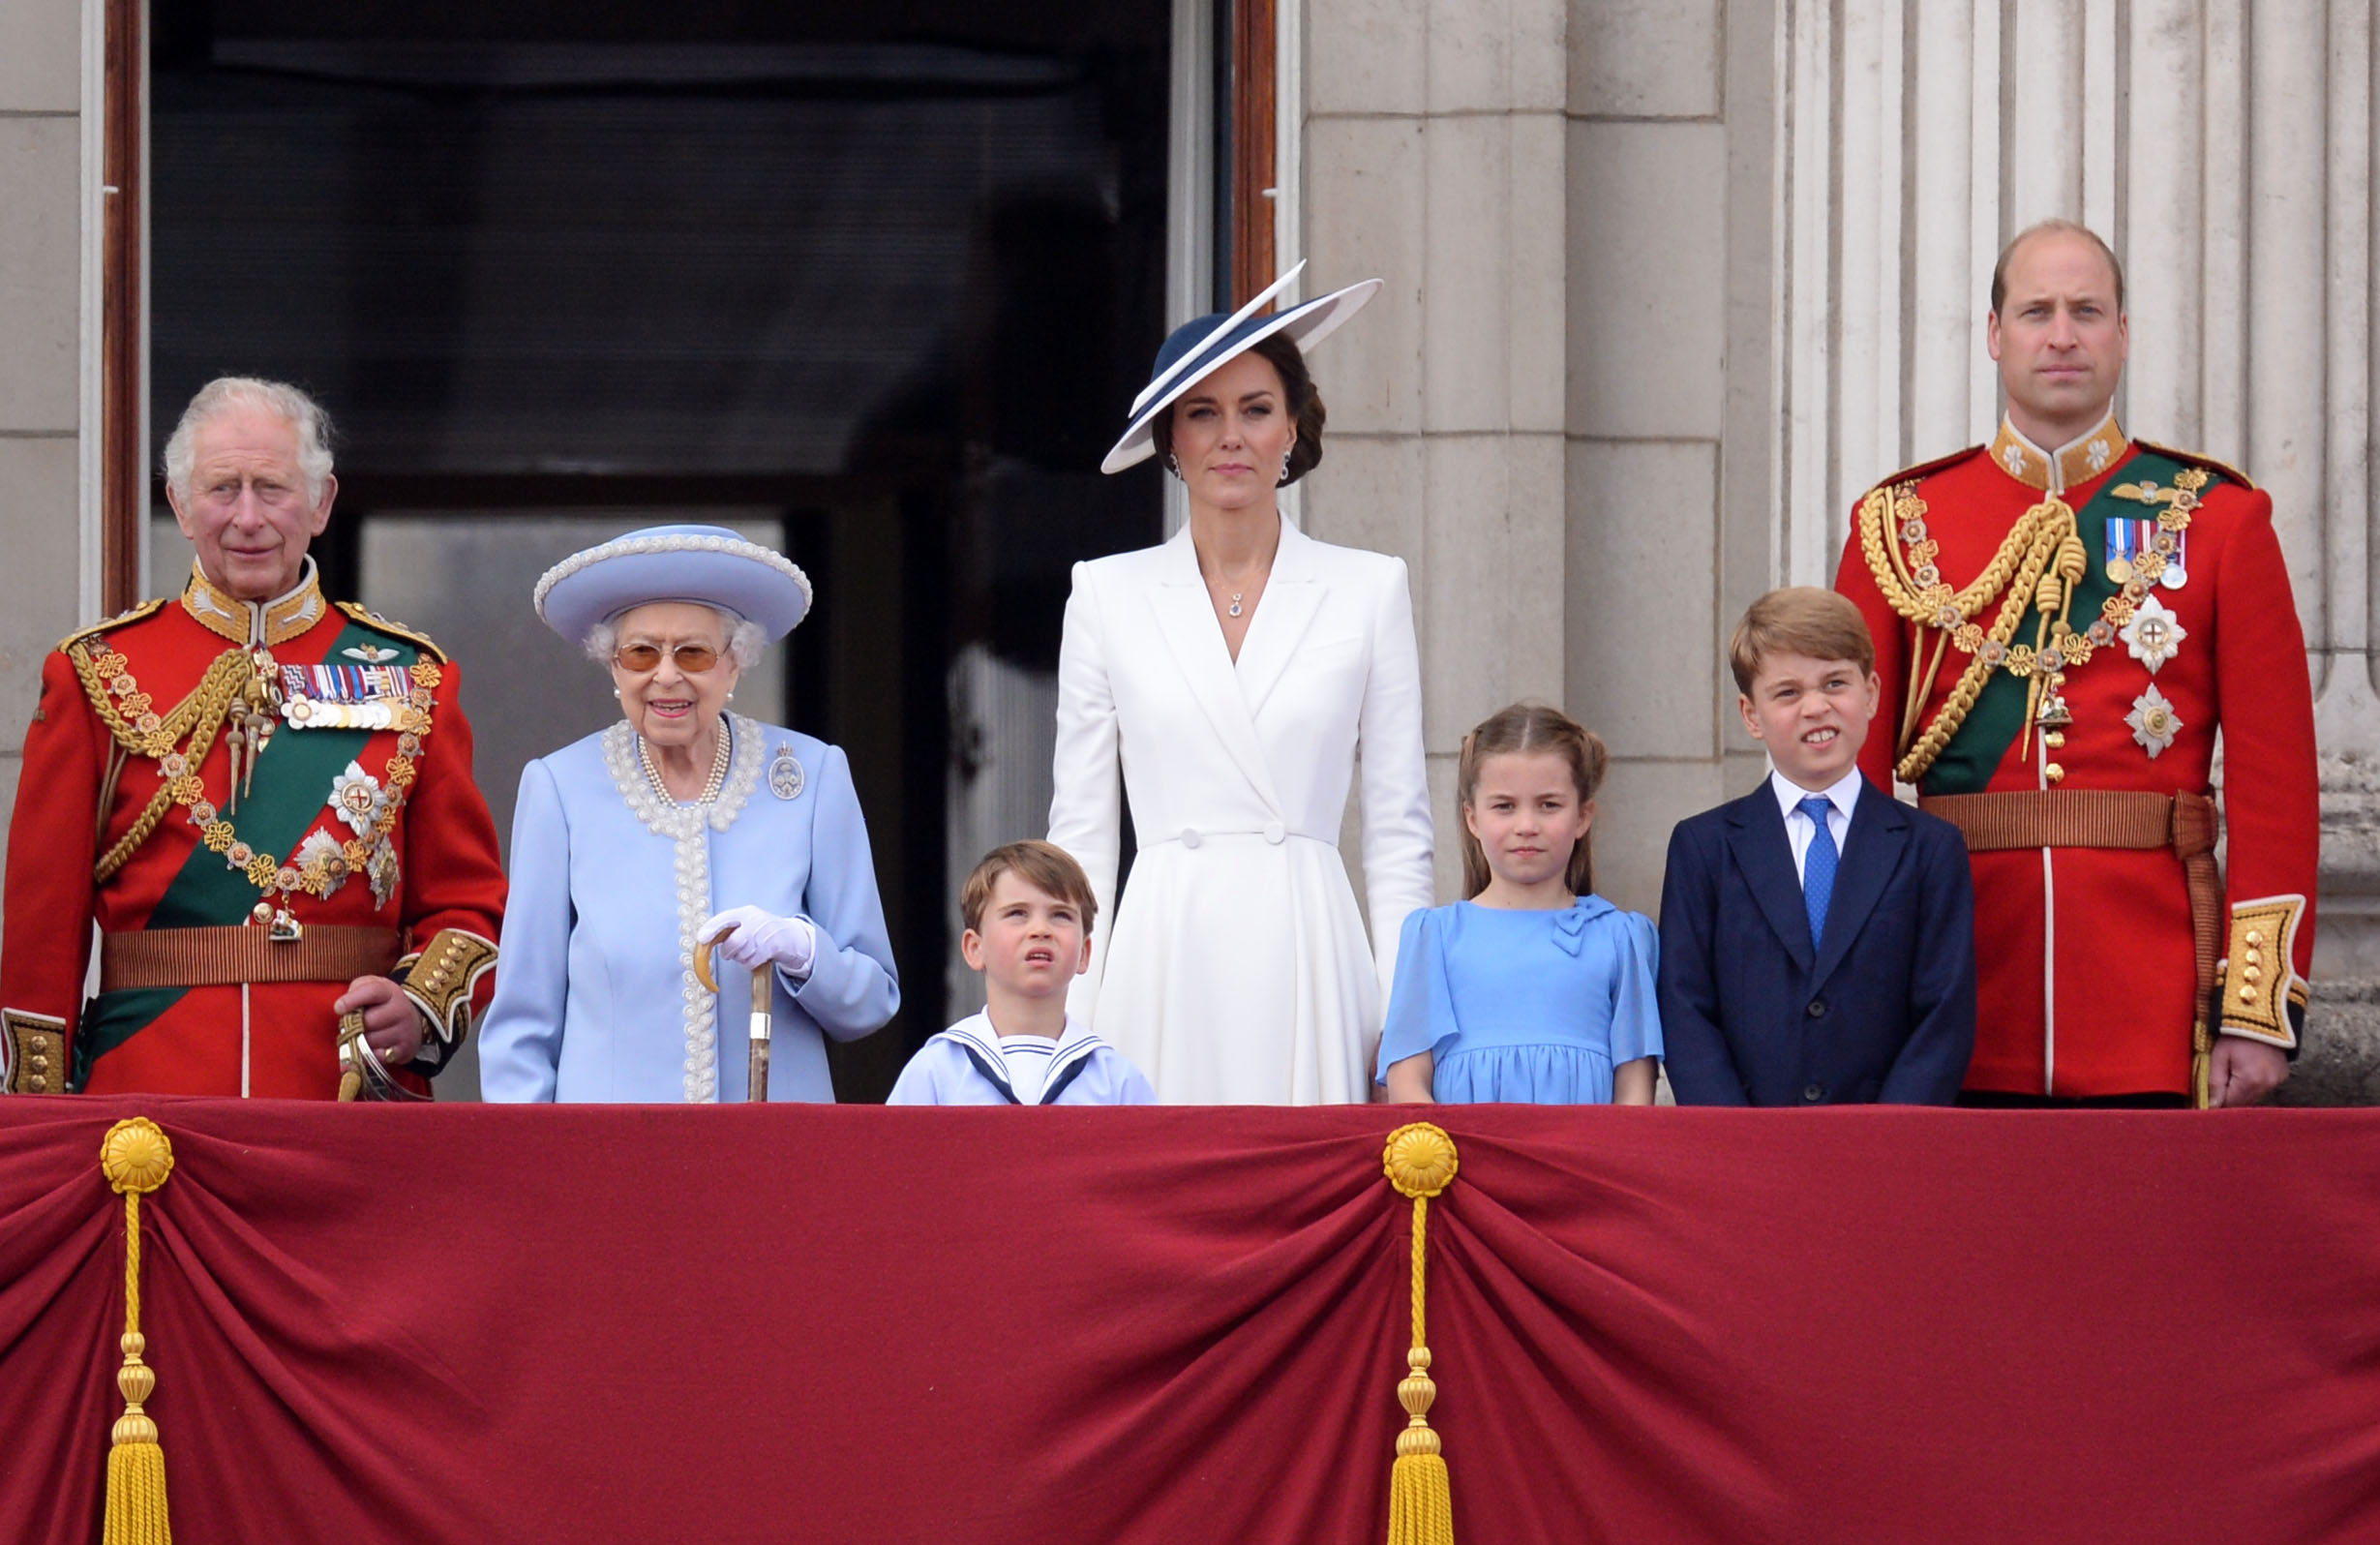 Queen Elizabeth II with the Royal Family